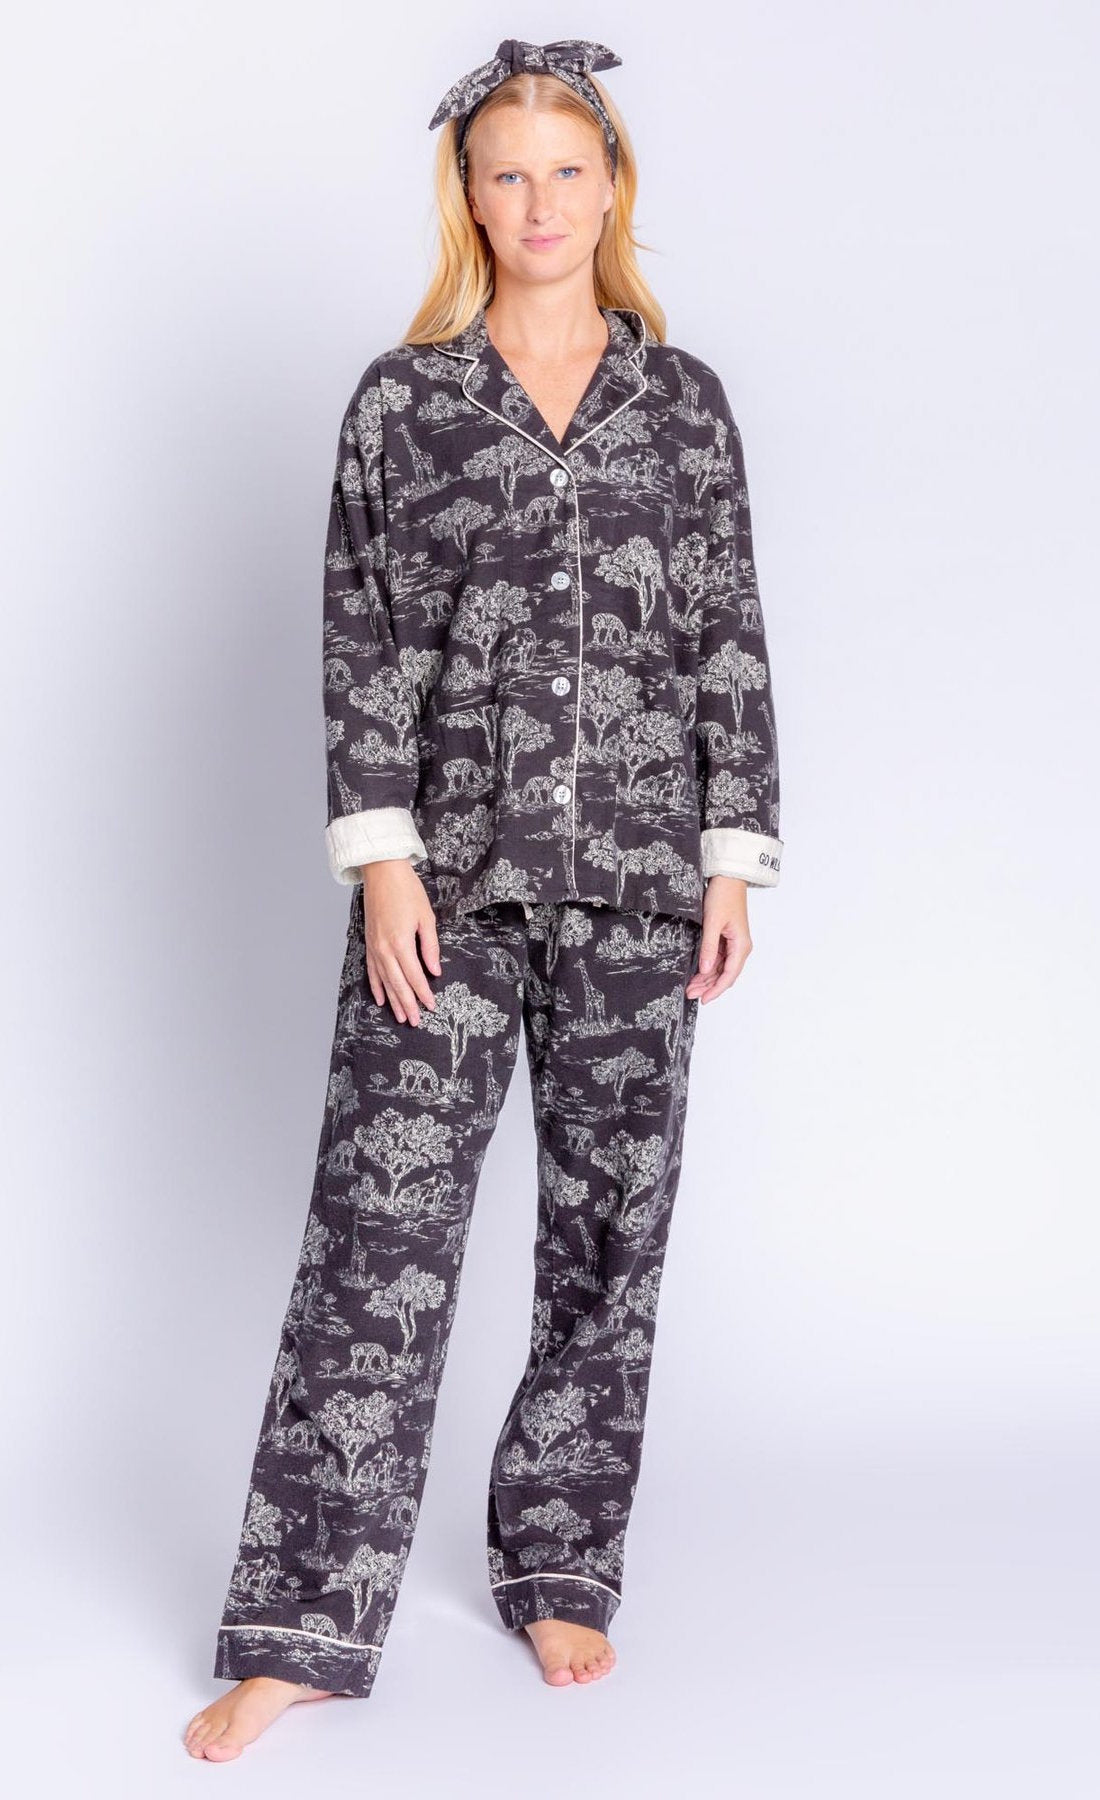 Front full body view of a woman wearing the PJ Salvage Go Wild PJ Set. This set is black with a white safari print all over it. It includes a long sleeve shirt and long pants. The cuffs are white and say go wild. The woman is also wearing a matching headband with a top knot.